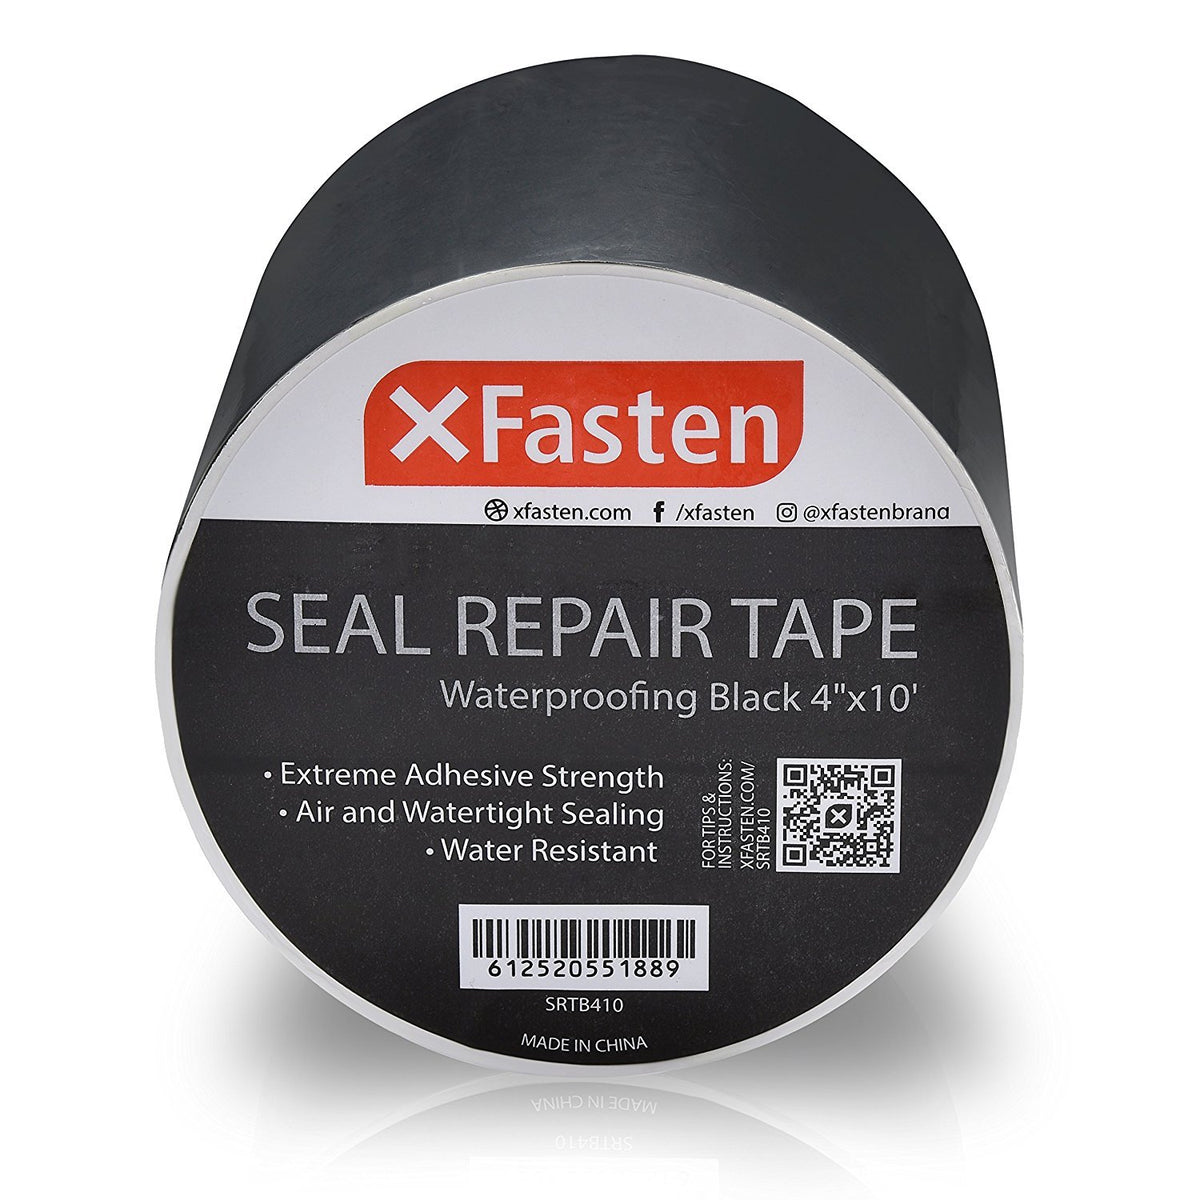 XFasten Fabric and Vinyl Repair Tape Clear 3-Inches by 20-Yards (2-Set) Waterproof Vinyl Repair Hole Patch Kit for Tent Exercise Ball Kayak Inflatable